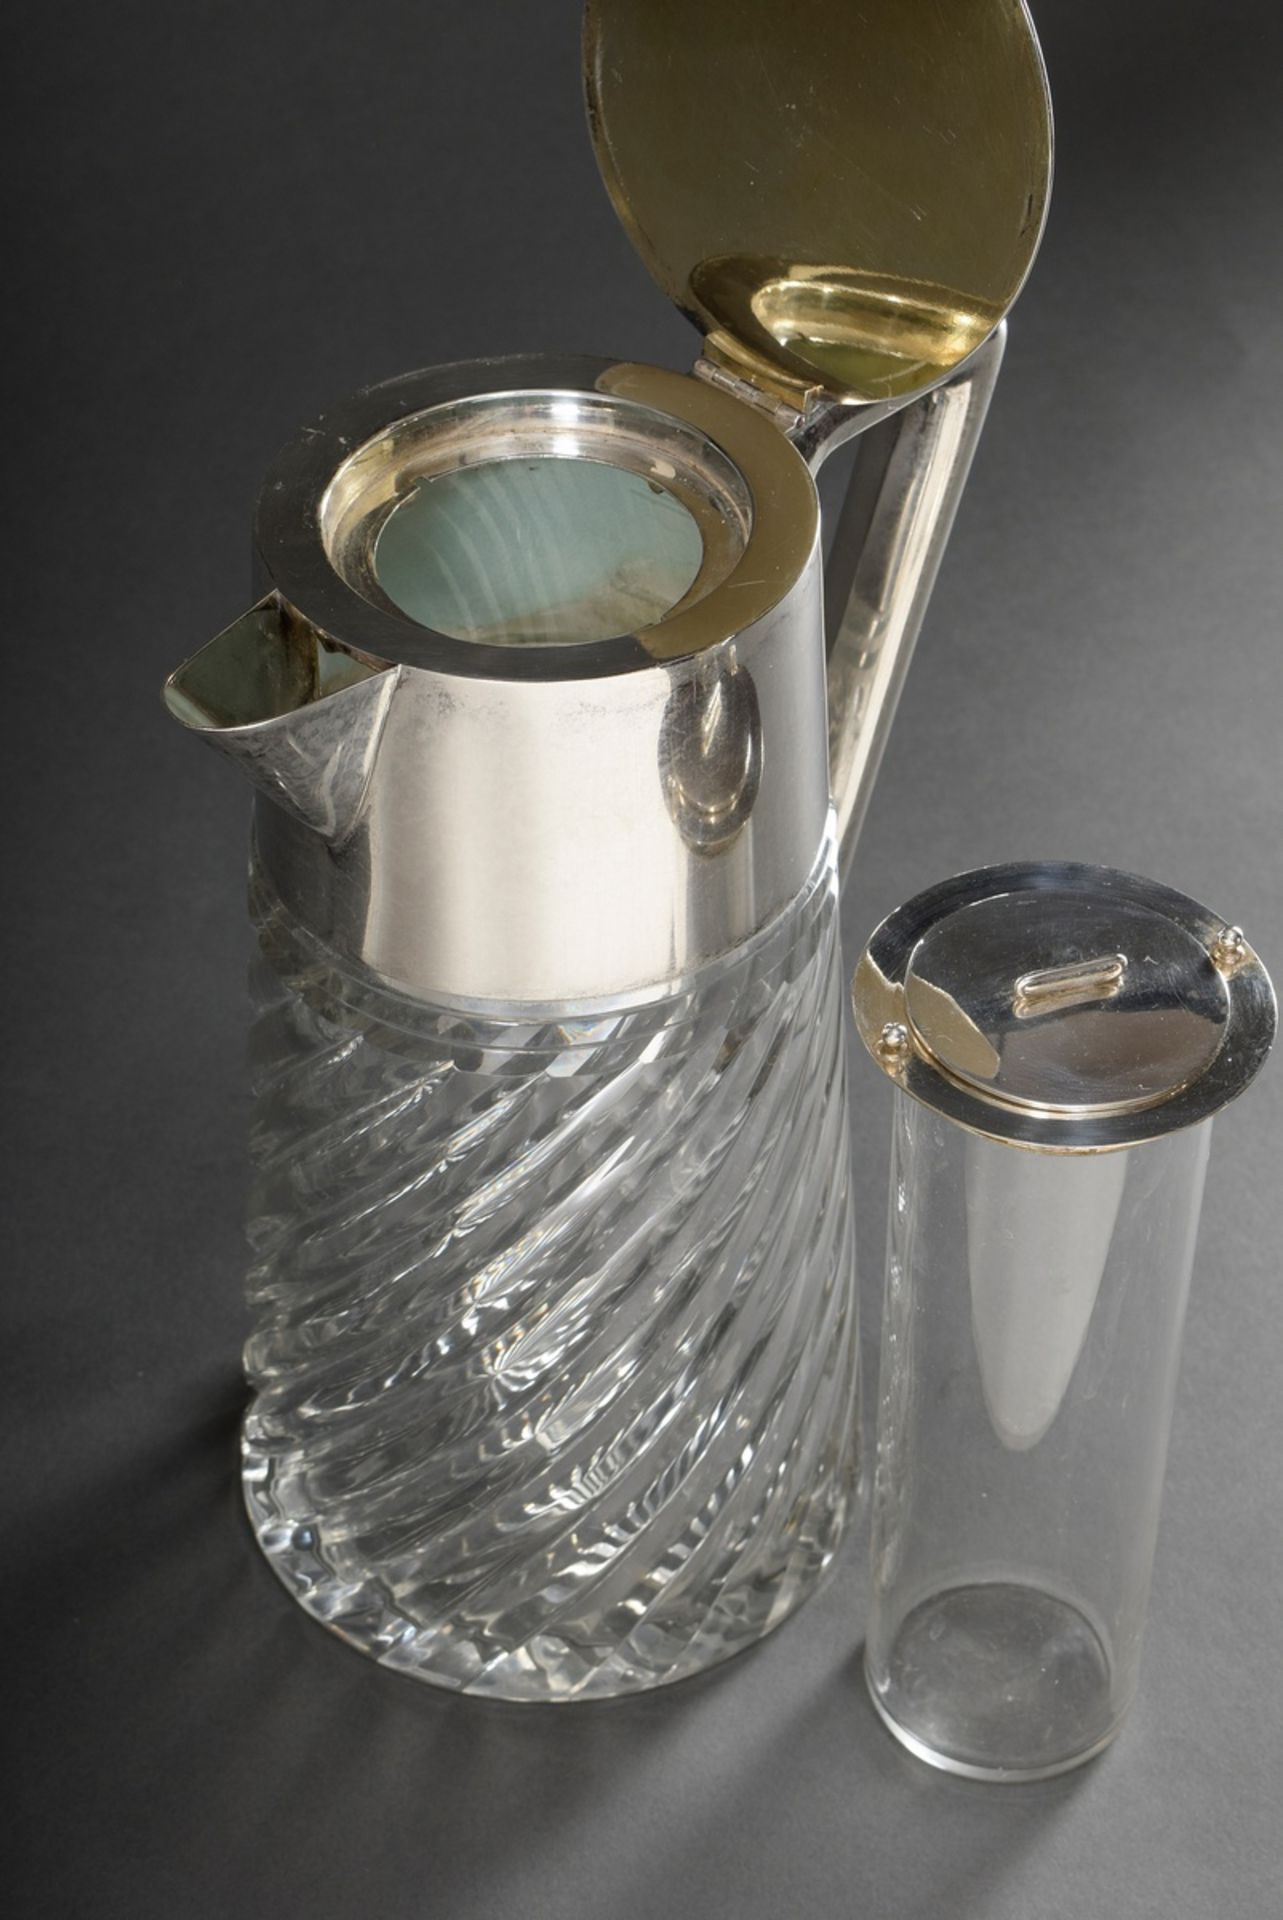 Large crystal juice jug "Kalte Ente" (Cold Duck) with silver 800 mounting and grooved wall, Wilkens - Image 6 of 7